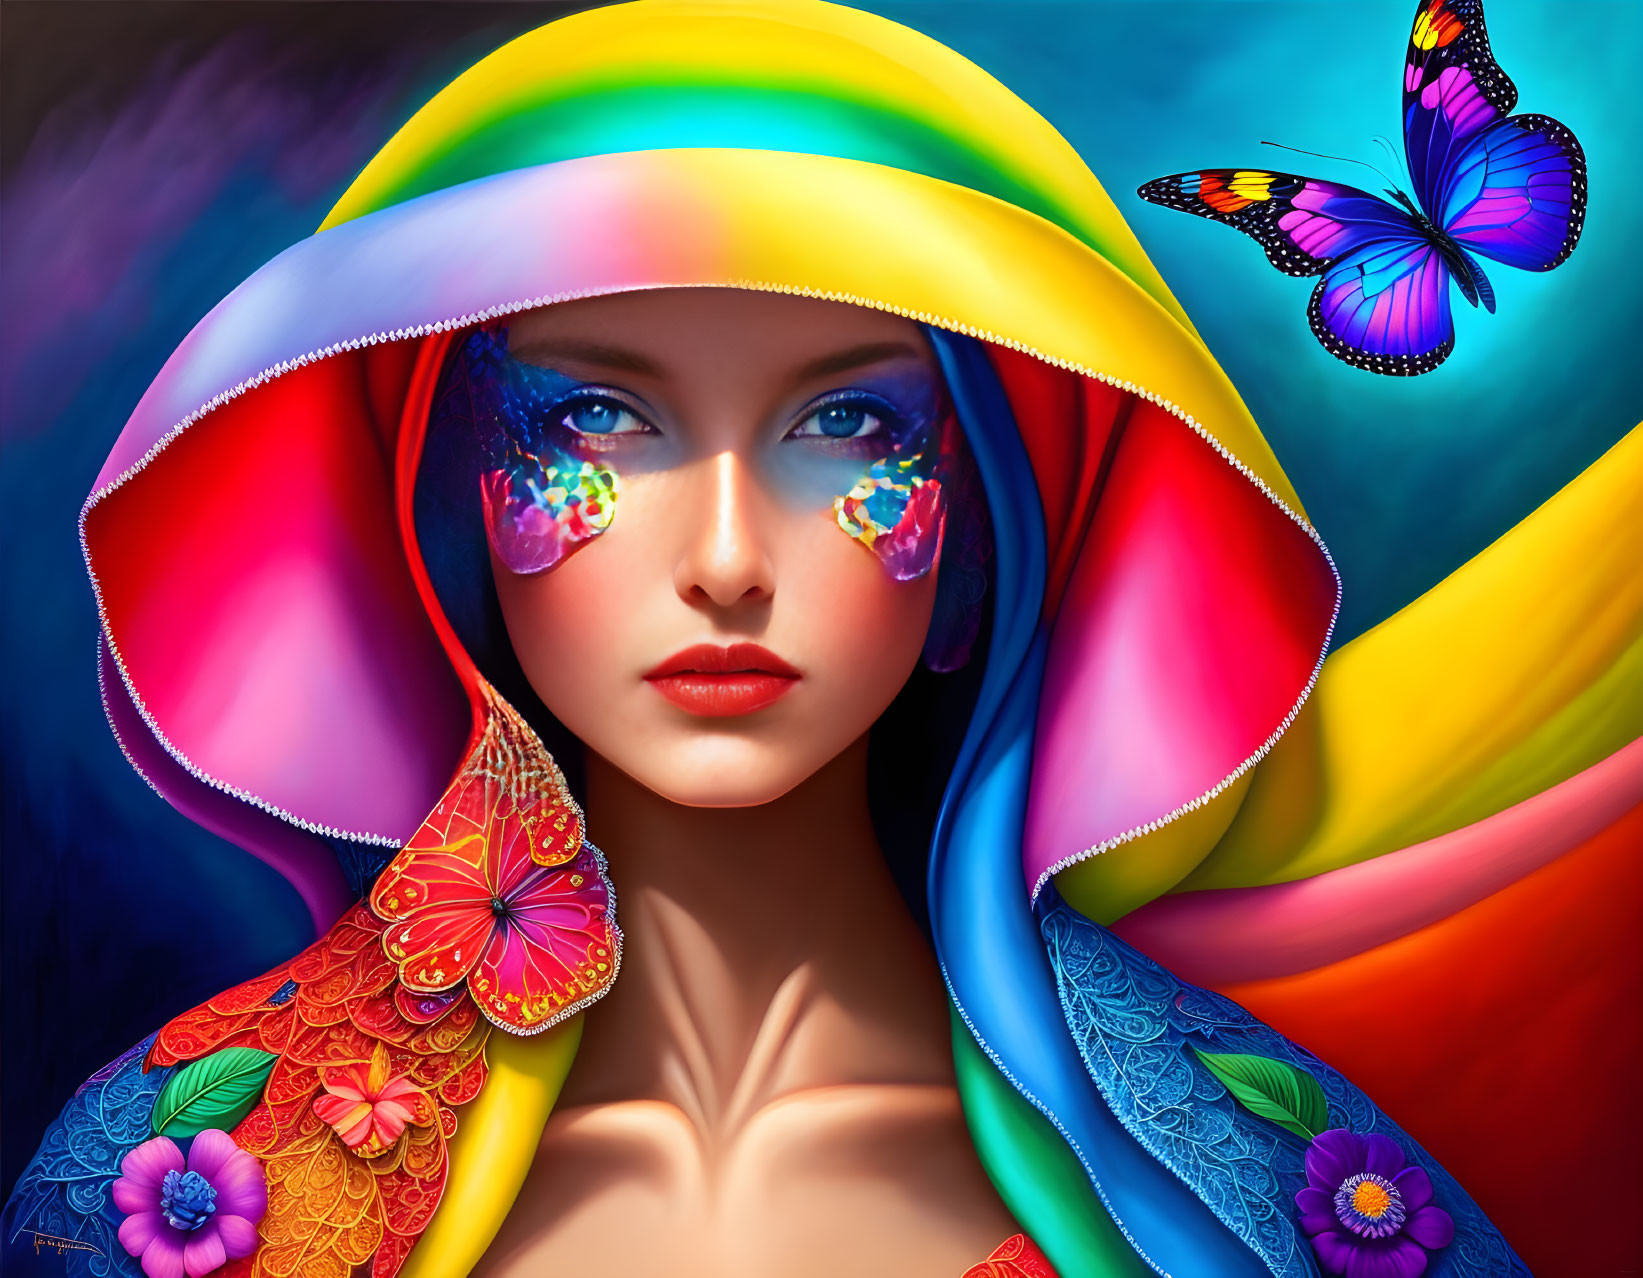 Colorful digital artwork: Woman with butterfly face decorations and real butterfly, rainbow backdrop